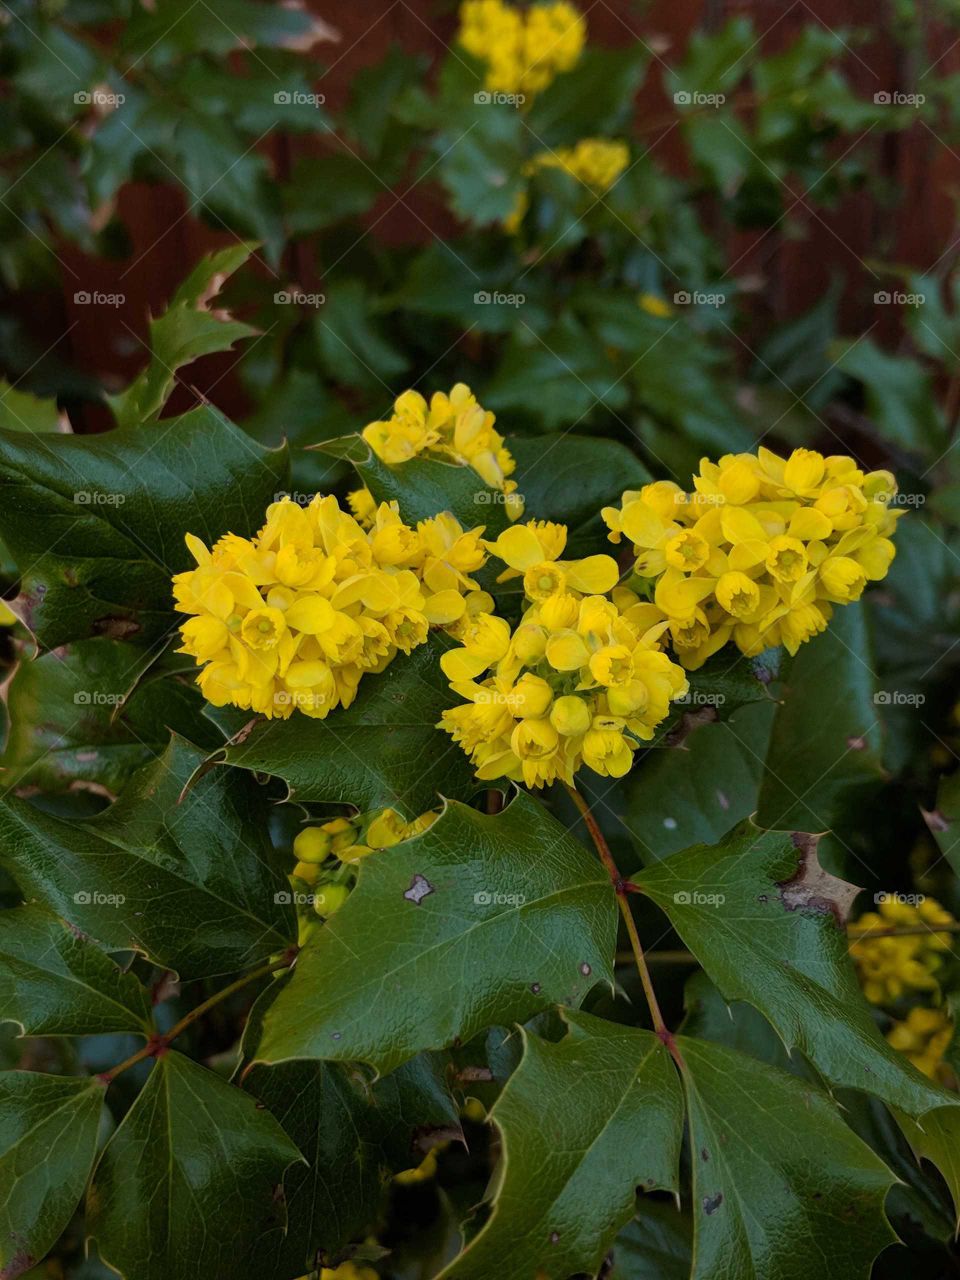 Holly with yellow blossoms